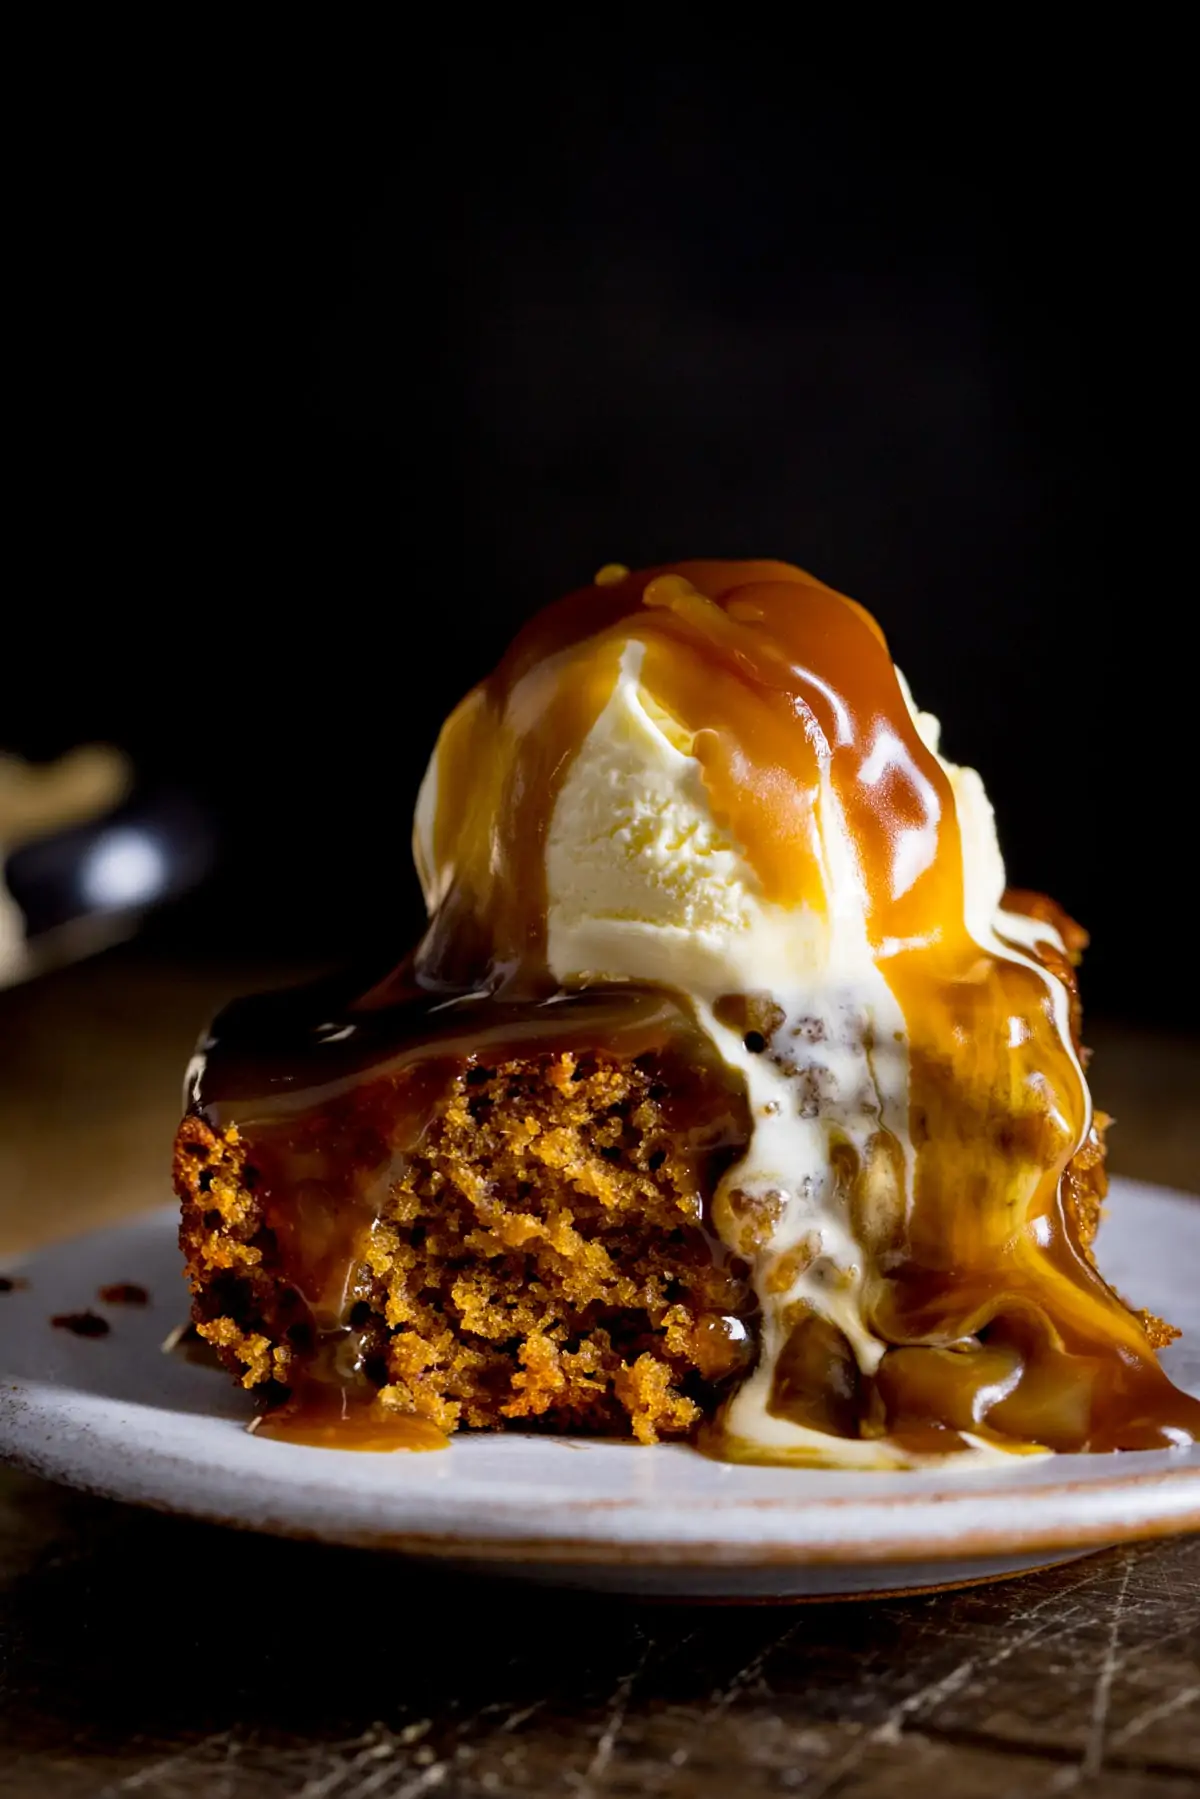 A piece of sticky toffee pudding on a white plate, topped with ice cream and toffee sauce against a dark background.